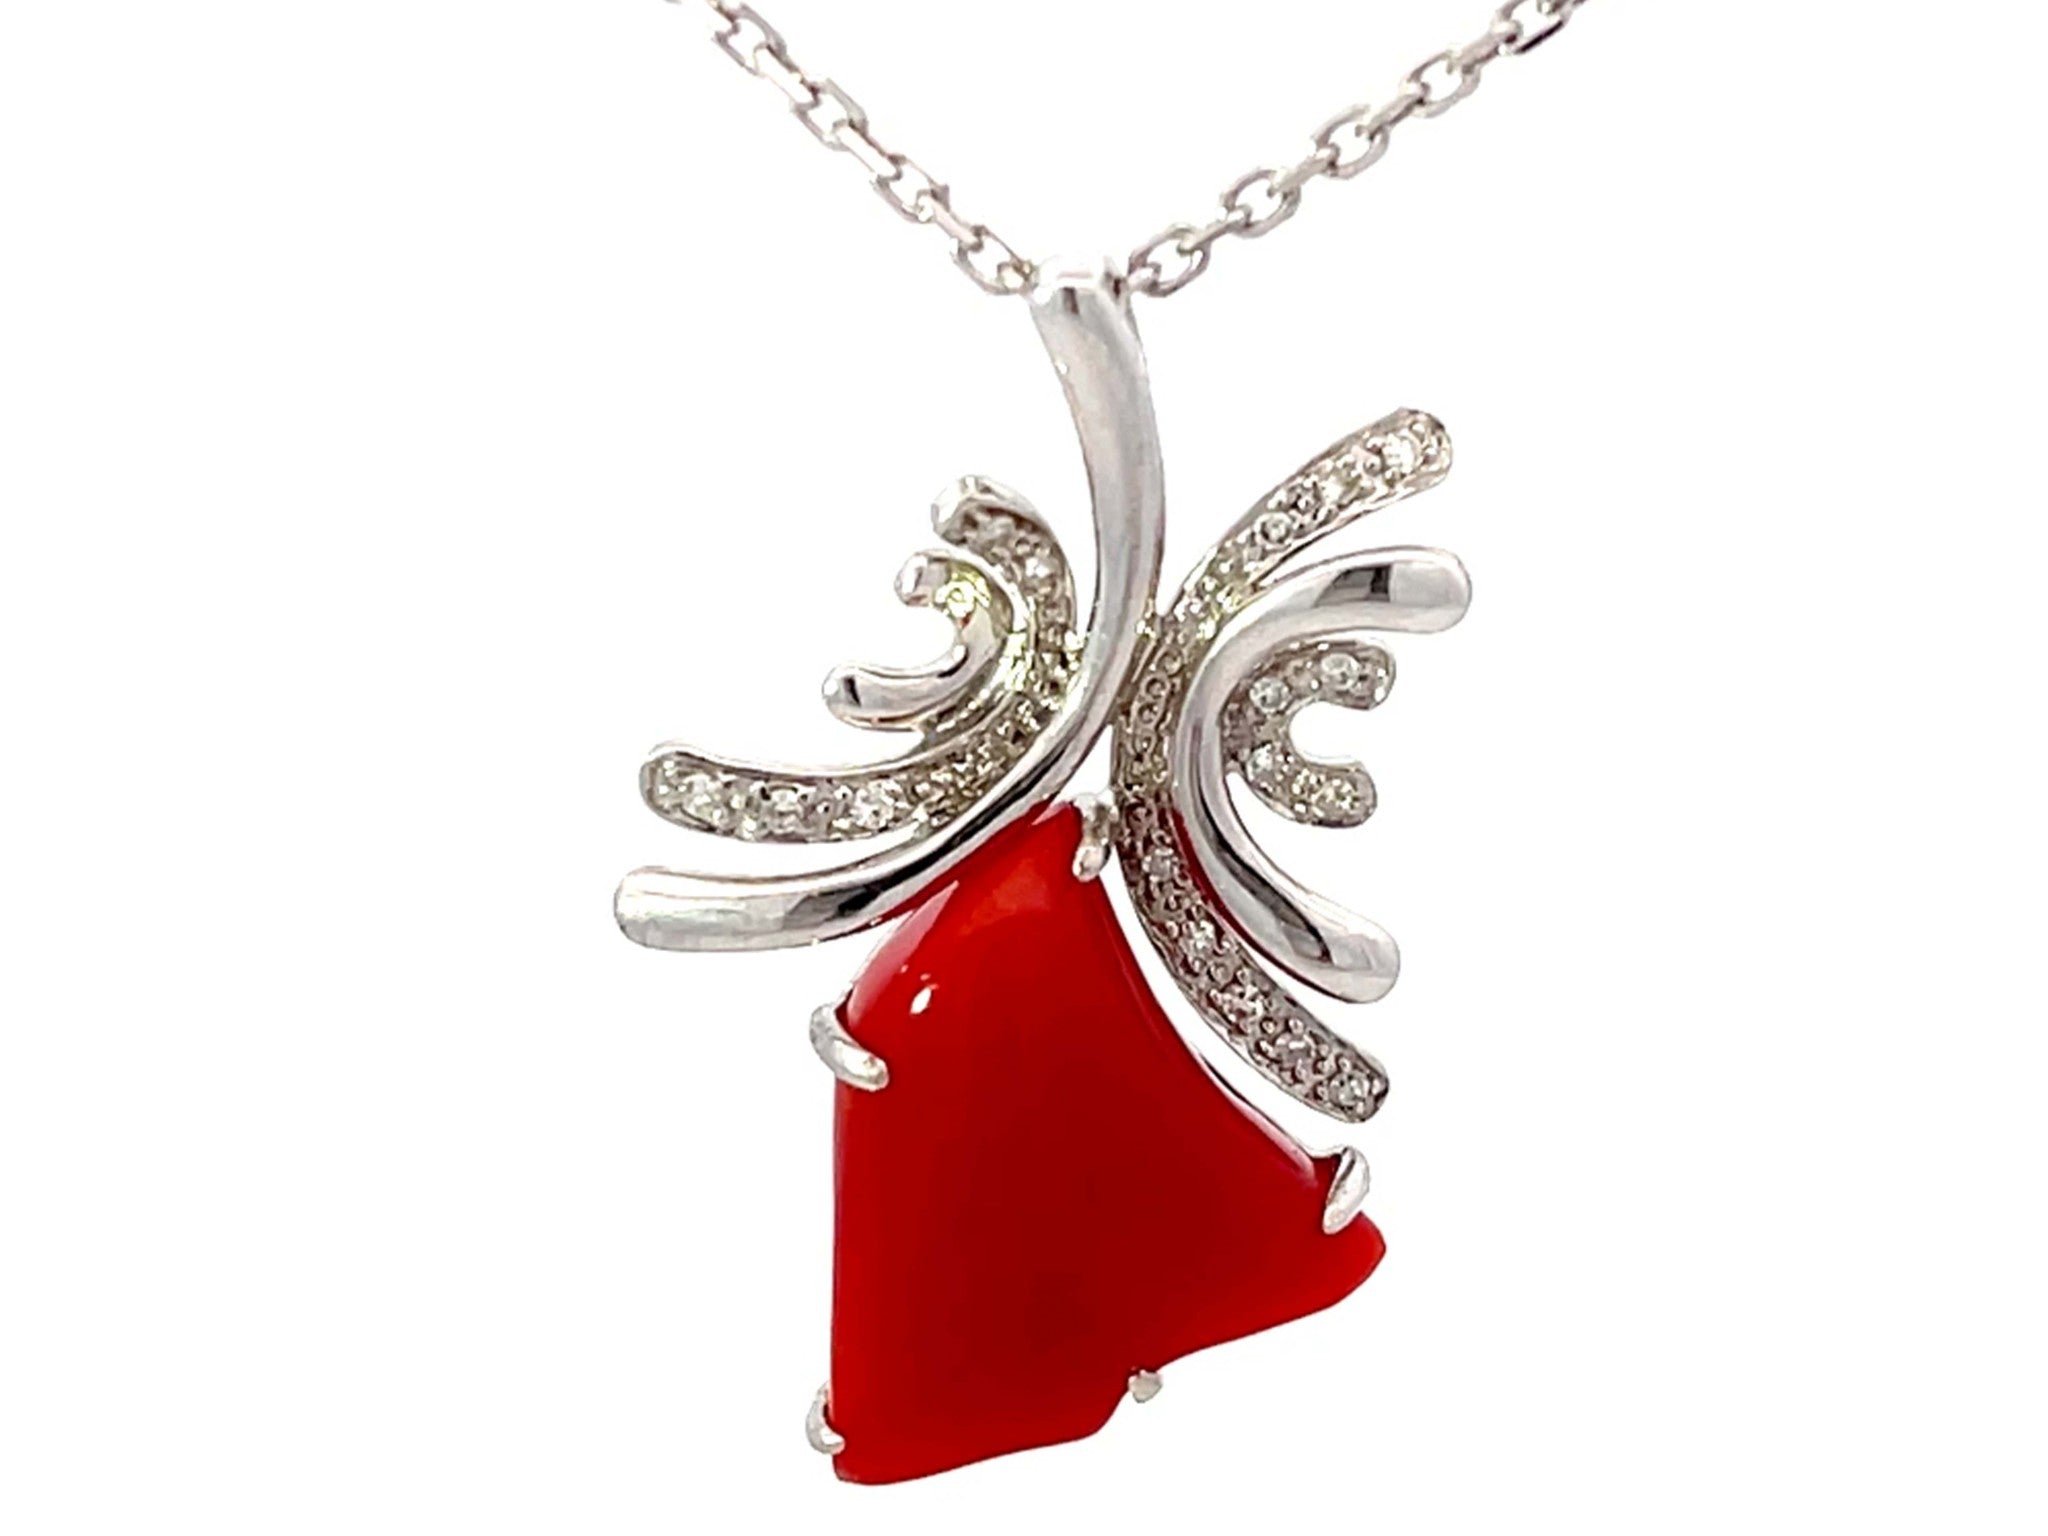 Aka Coral Red Heart Diamond Necklace Solid 14k White Gold